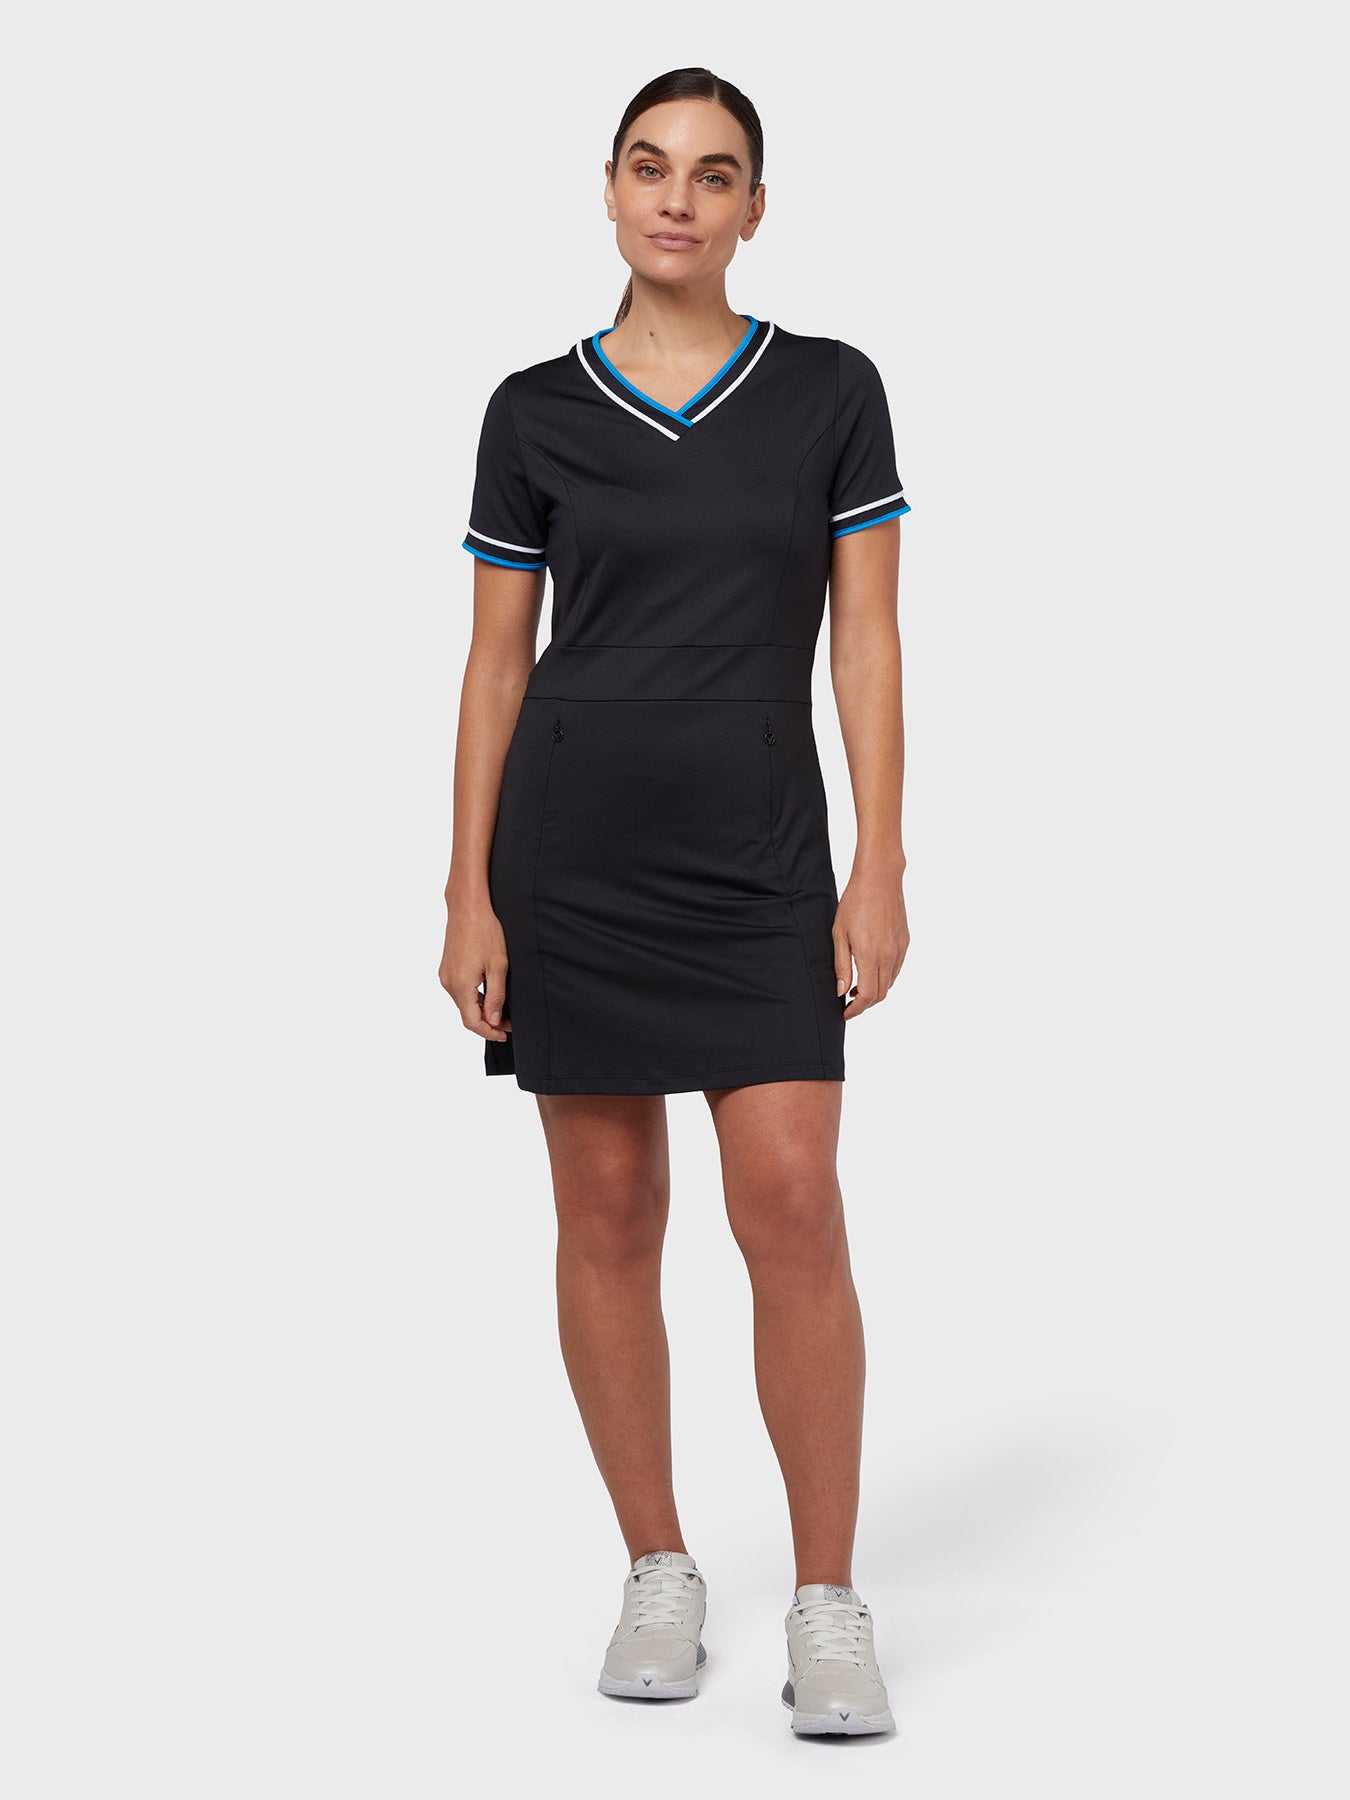 View VNeck Womens Dress In Caviar information